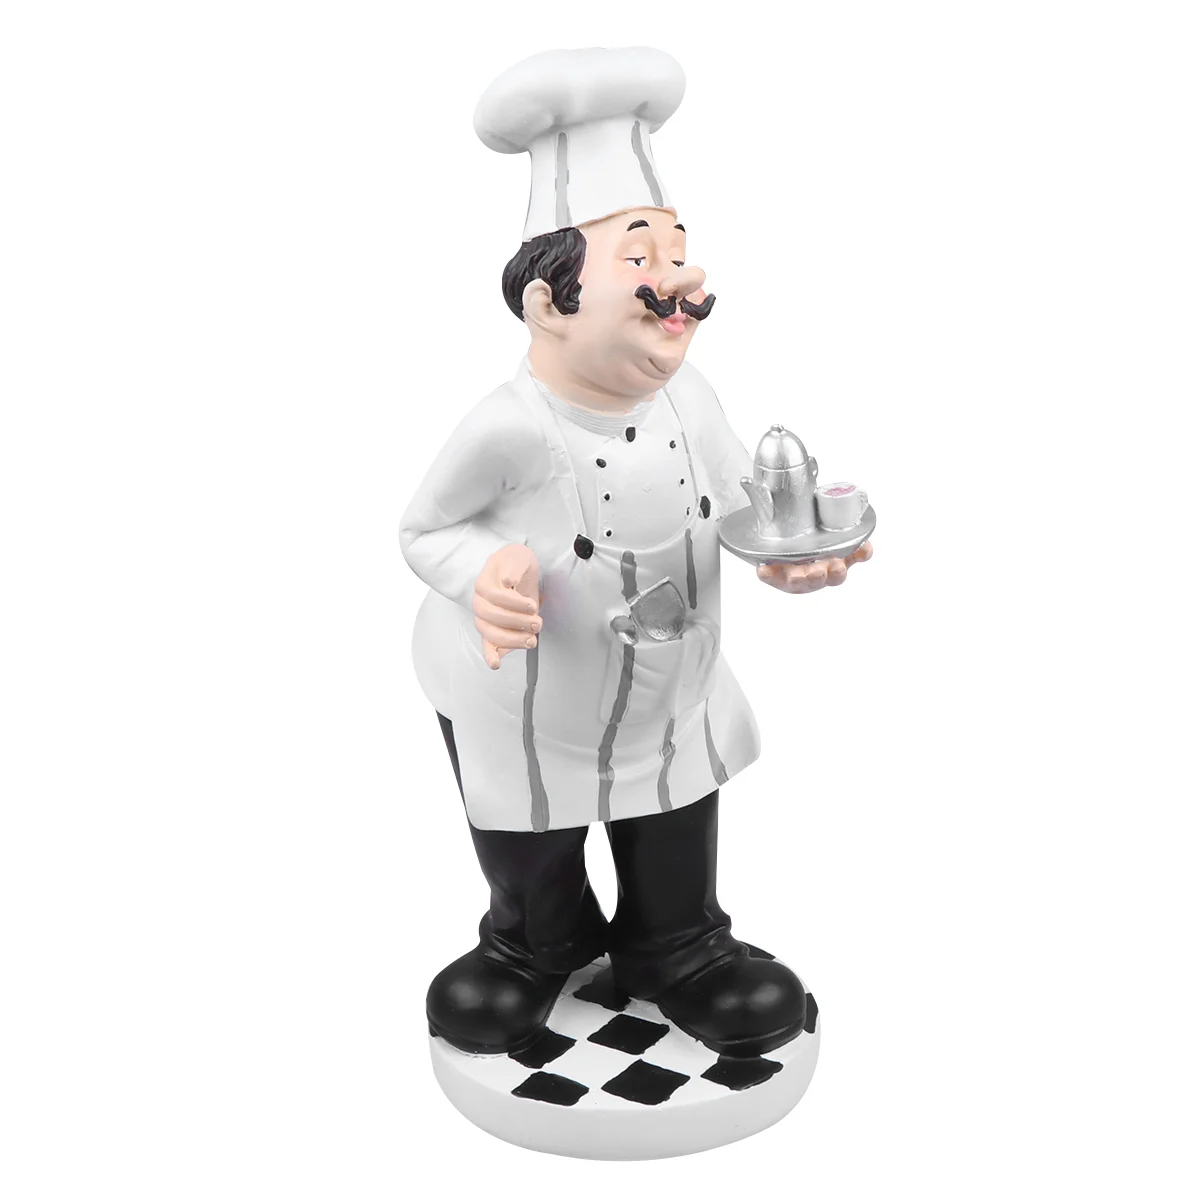 

Resin Chef Figures Statue Holding Red Wine Figurines Chef Statue Home Countertop Table Decoration Country Cottage Decor Gourmet